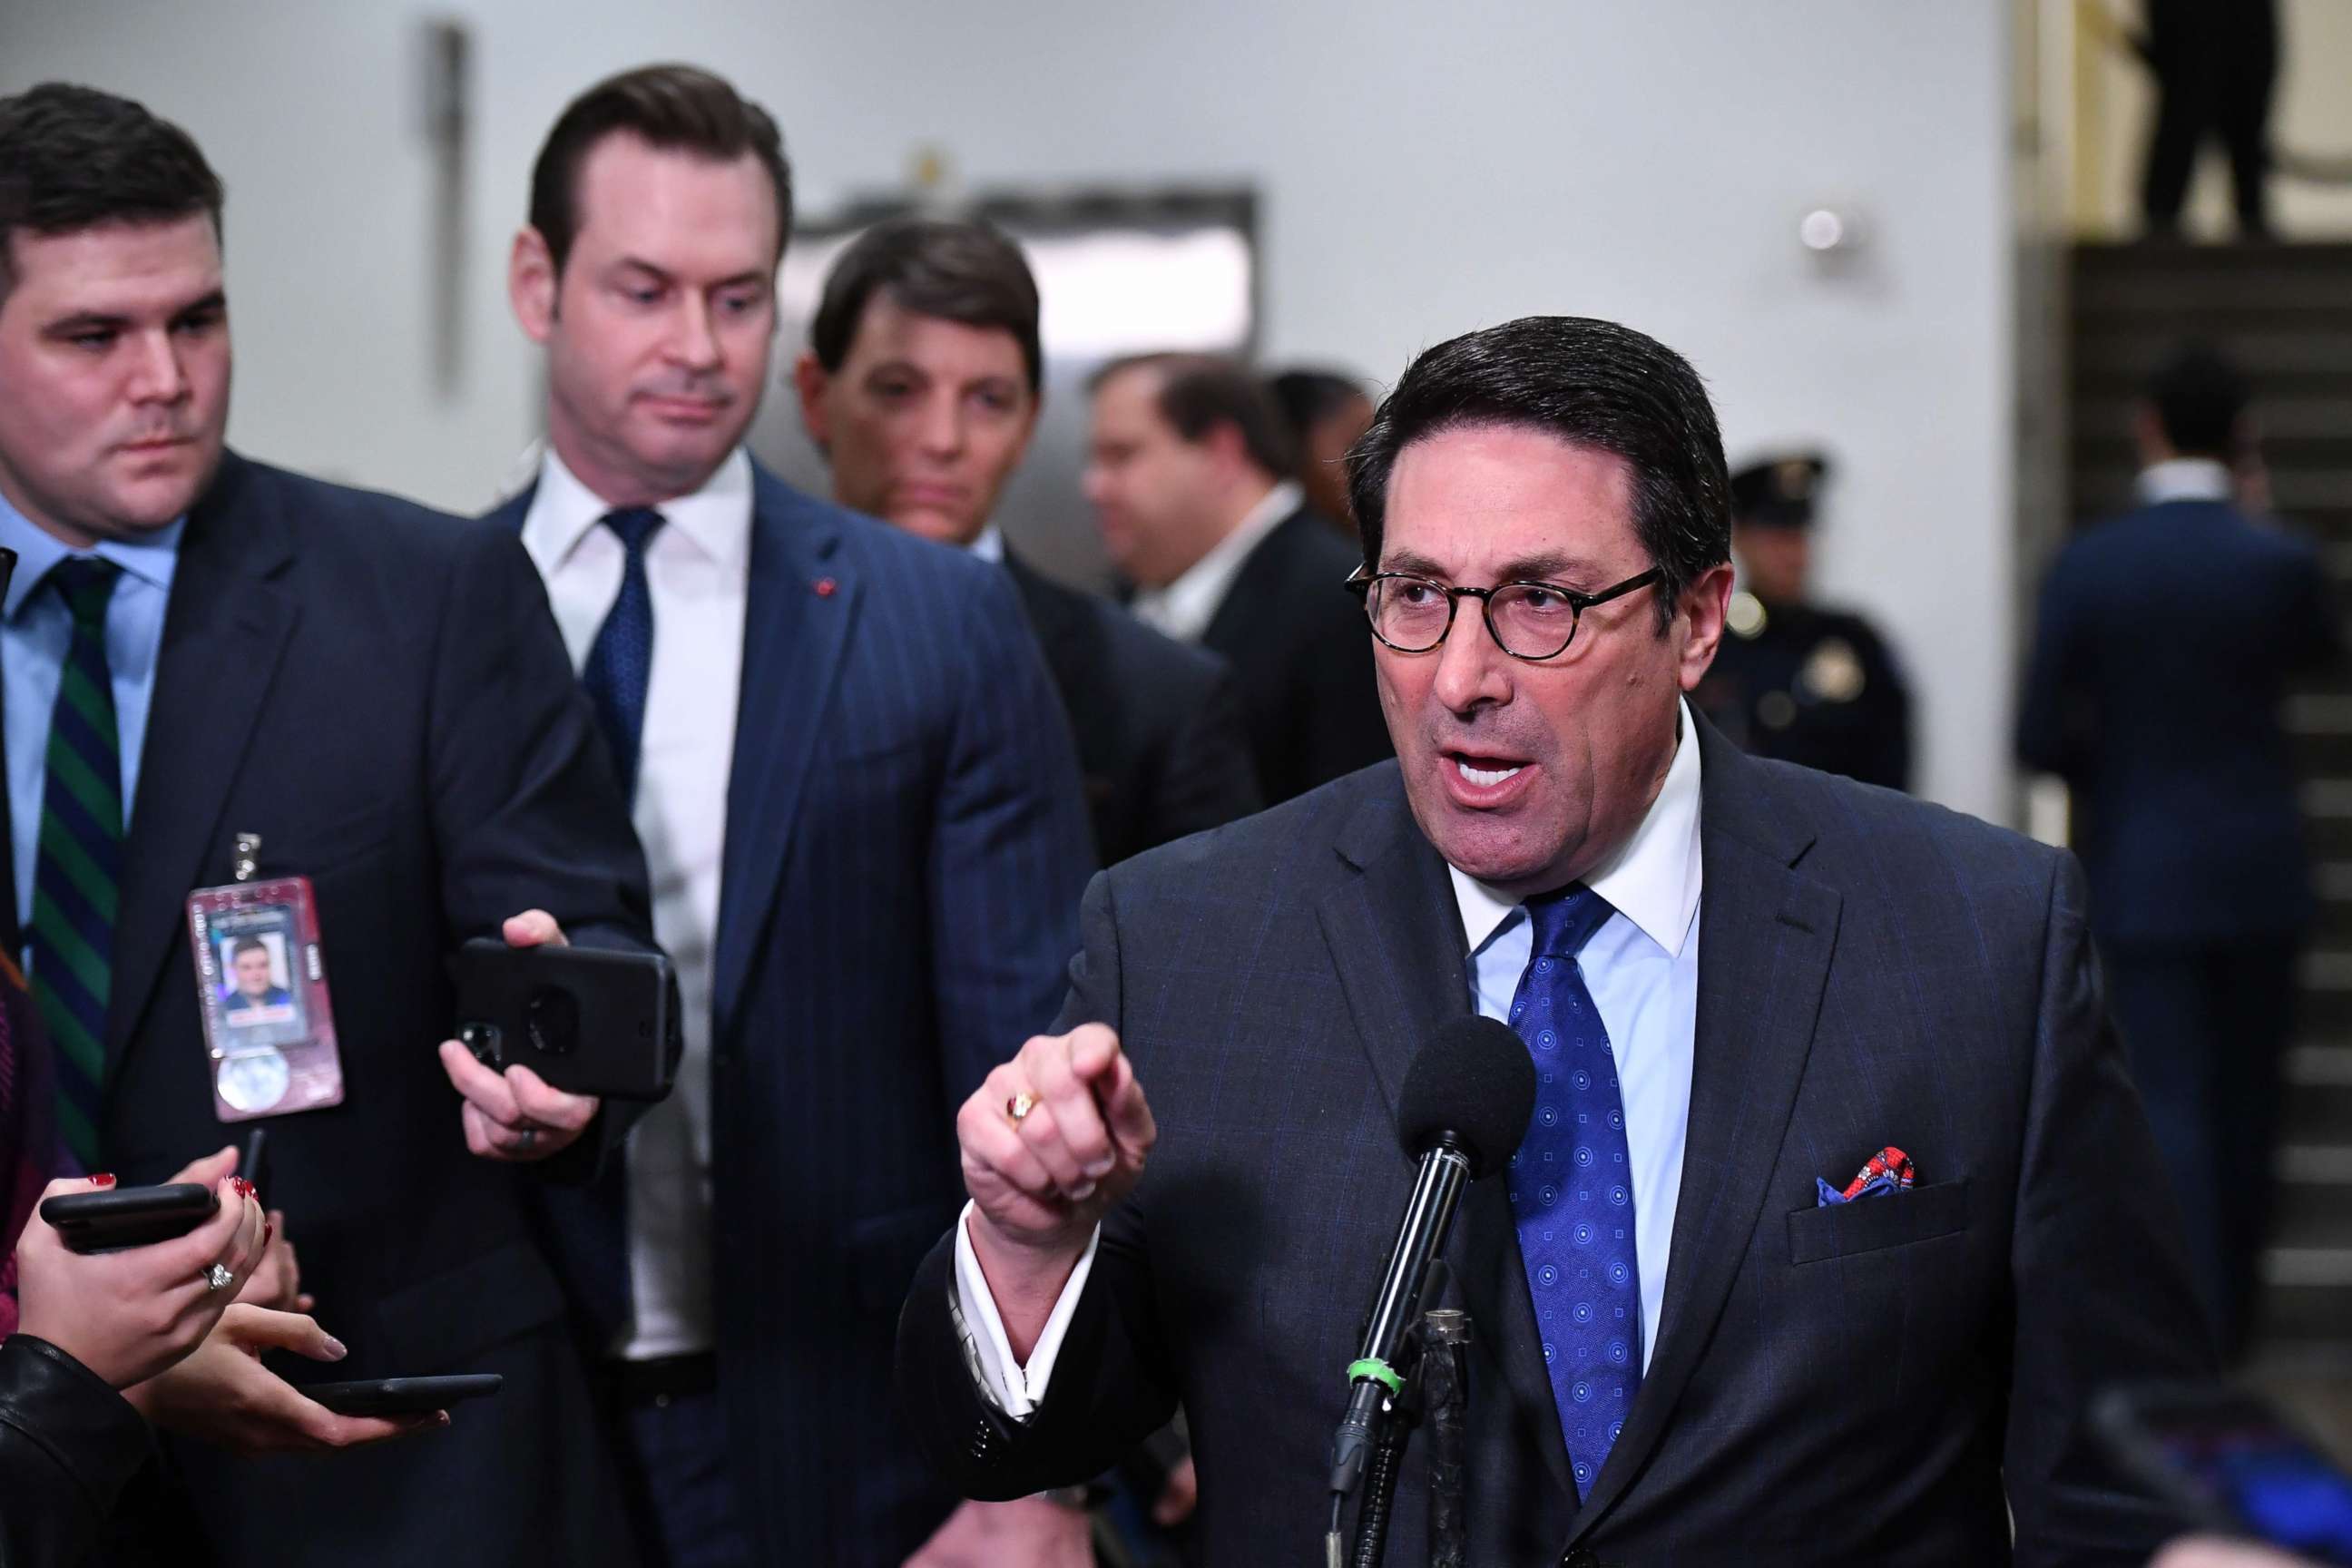 PHOTO: President Donald Trump's personal lawyer Jay Sekulow speaks to the press during a recess in the impeachment trial at the U.S. Capitol on Jan. 24, 2020, in Washington.